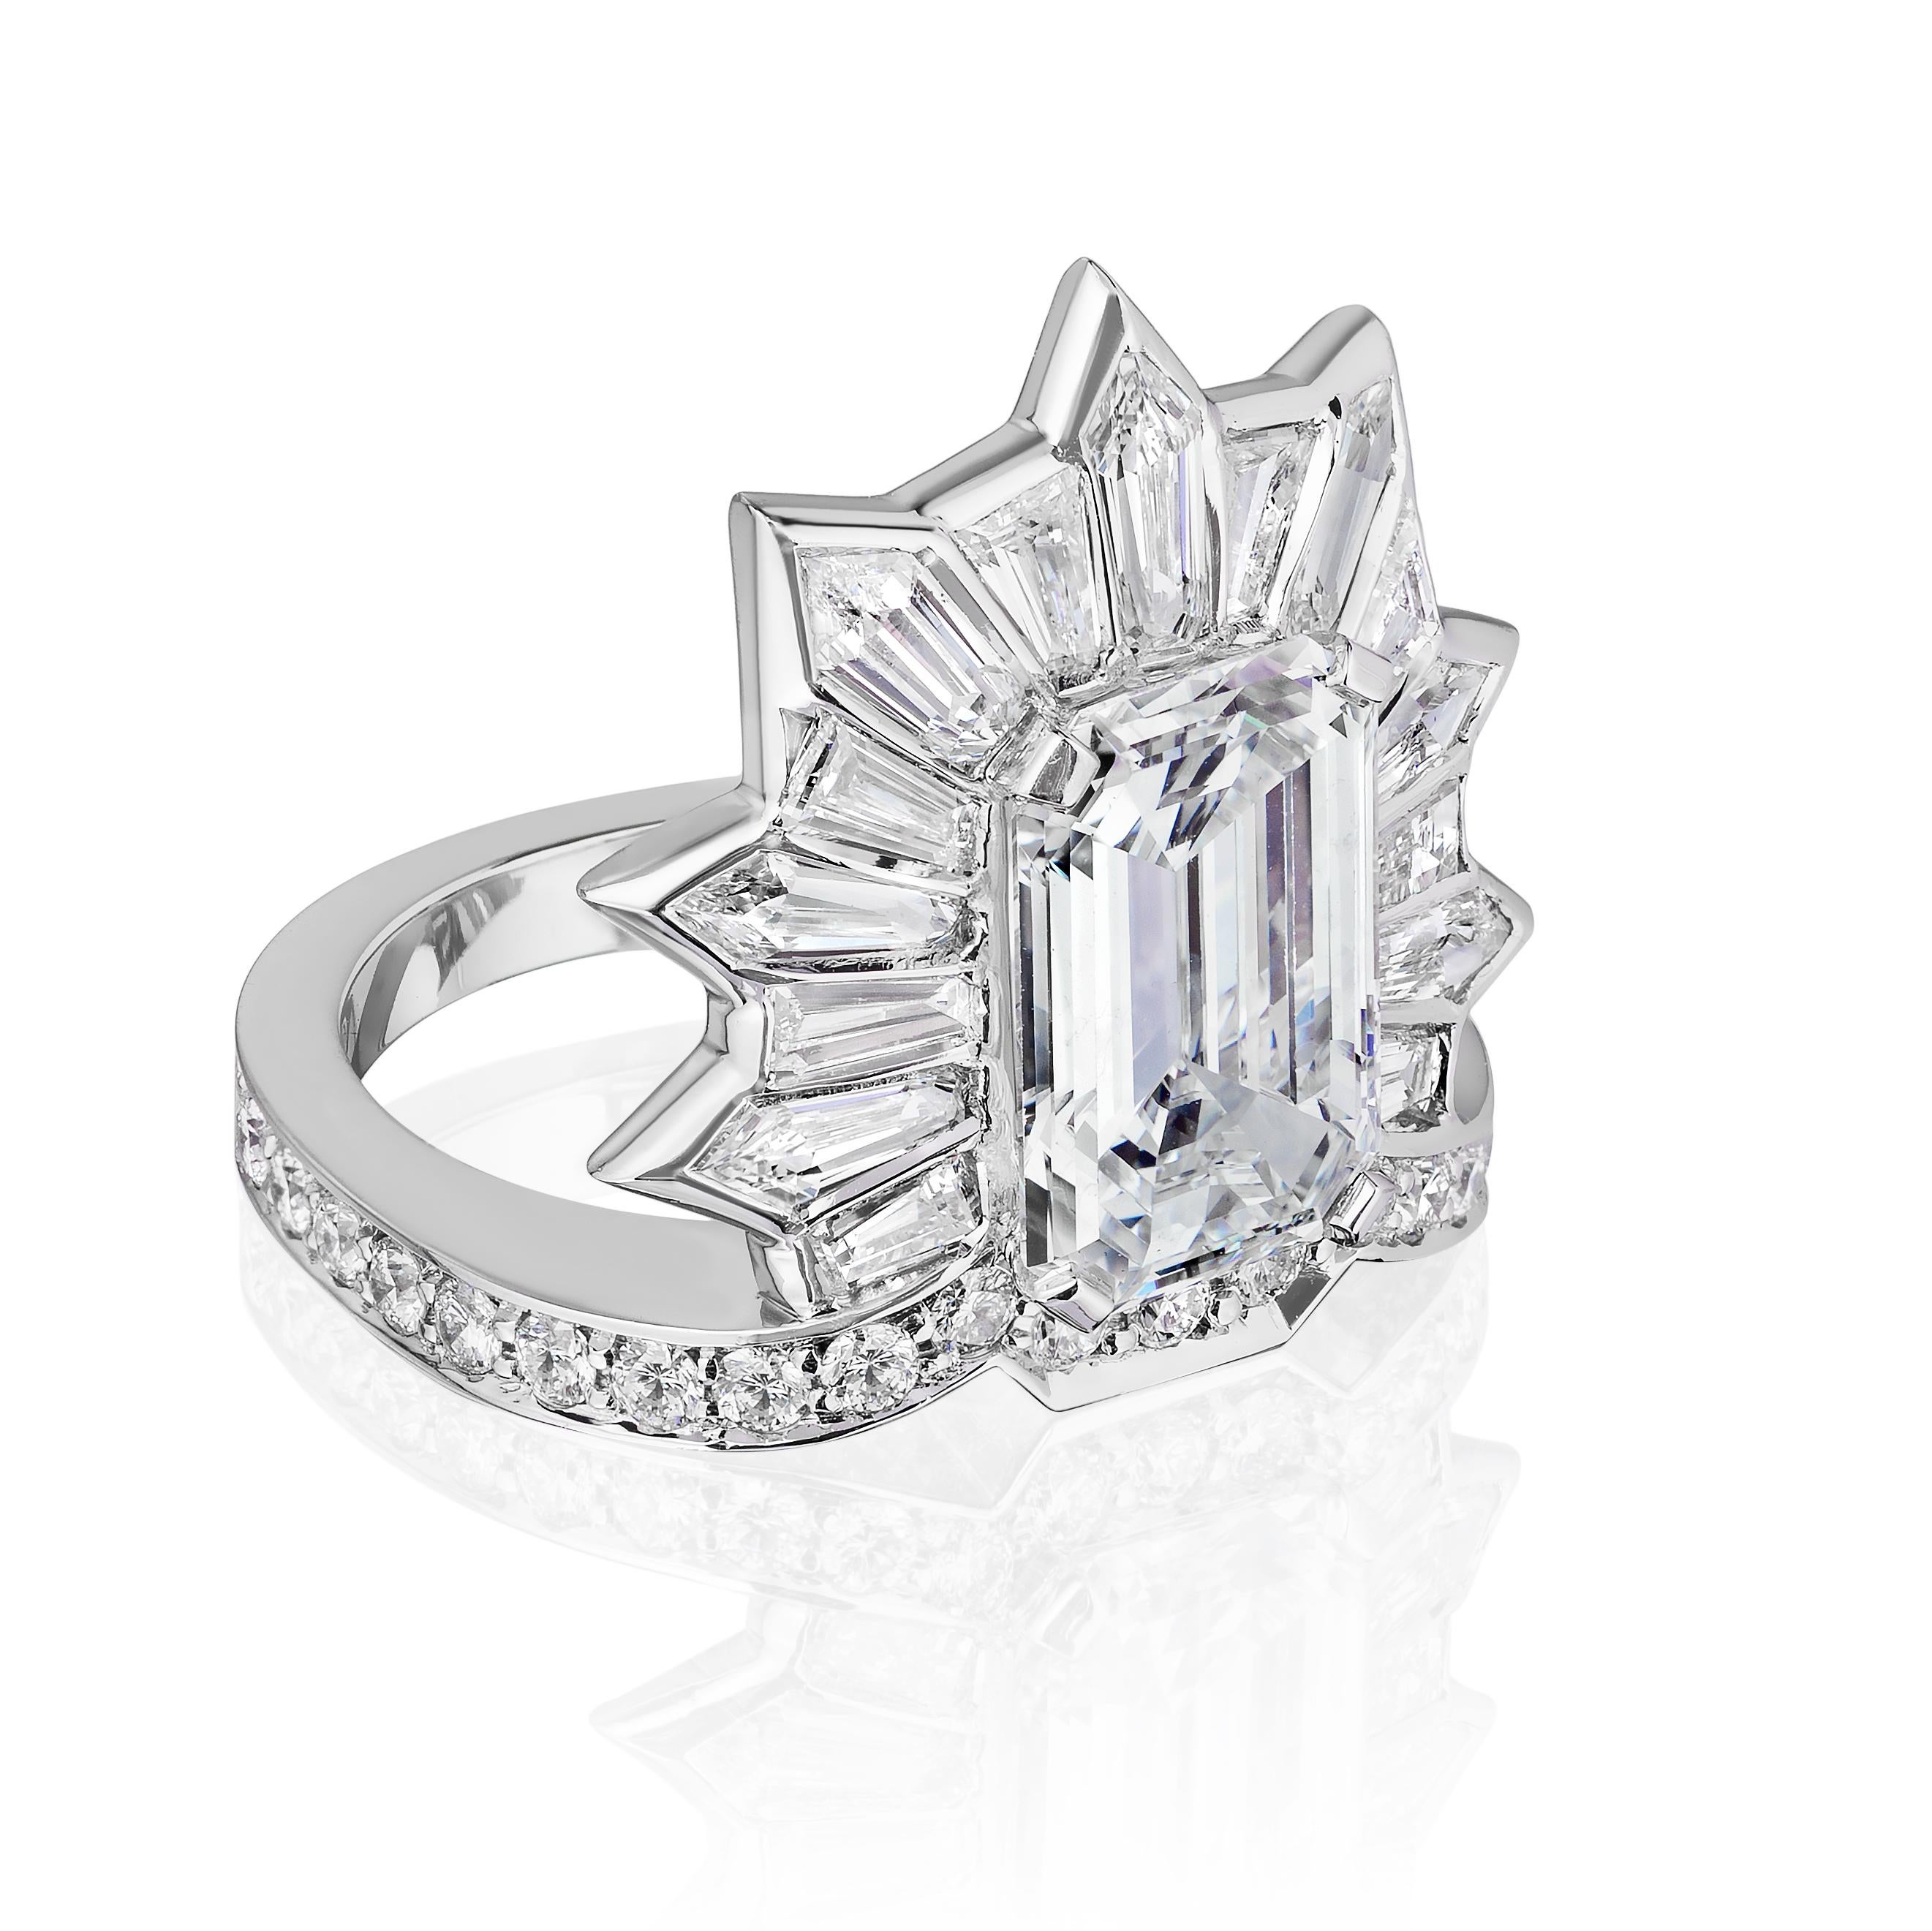 Highly unusual Emerald Cut Diamond Cocktail Ring.

Emerald Cut center stone weighing 5.20 Carats surrounded by Kite and Baguette shaped Diamonds weighing 2.25 Carats with Round Brilliant Diamonds weighing 0.60 Carats.
Emerald cut is GIA certified as